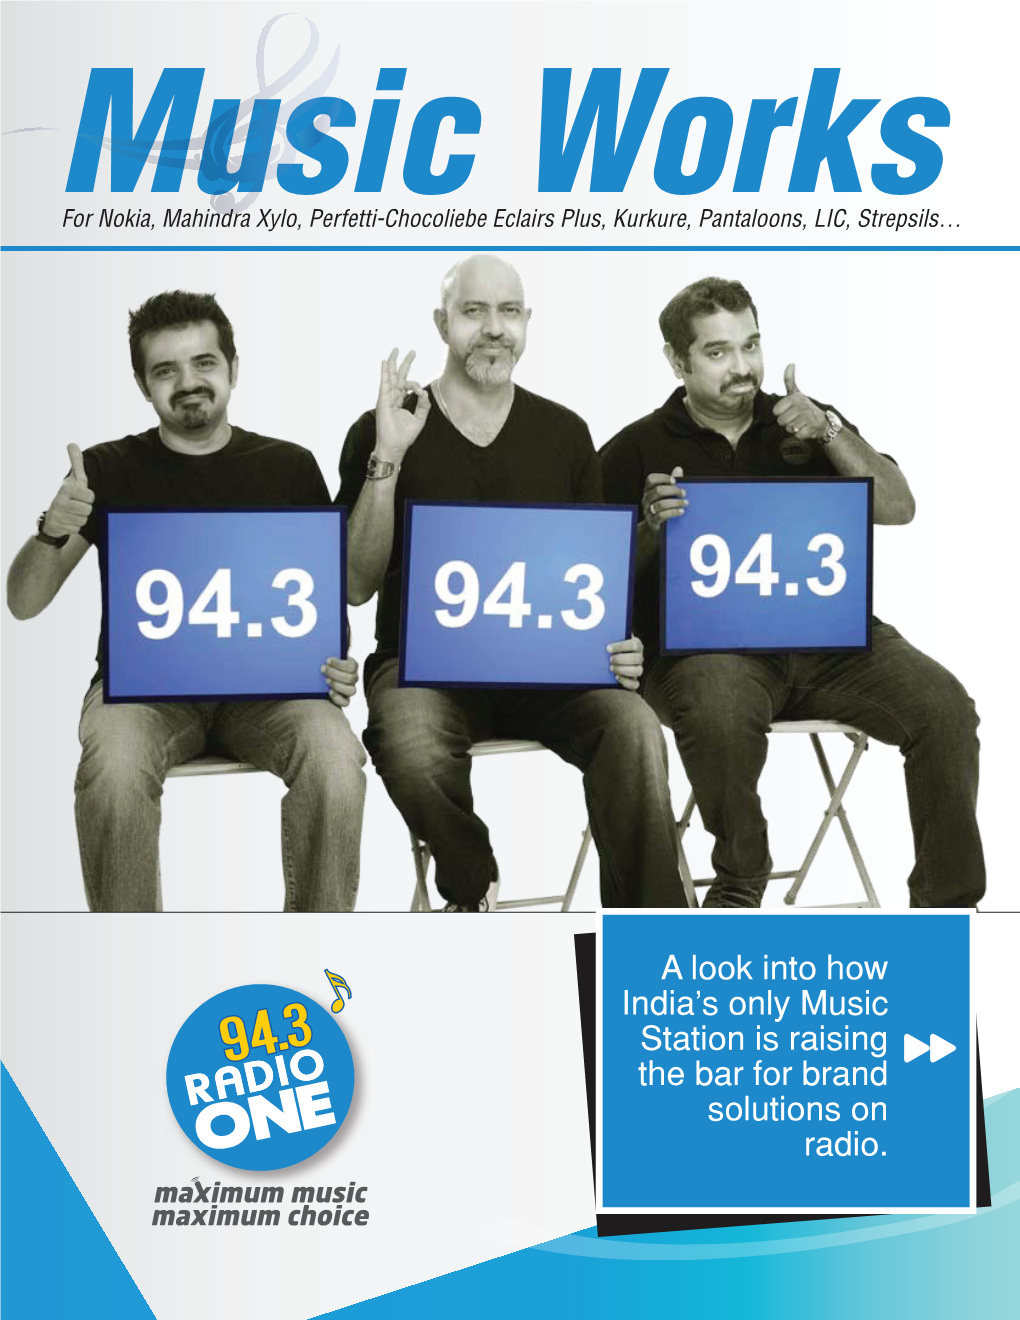 A Look Into How India's Only Music Station Is Raising the Bar for Brand